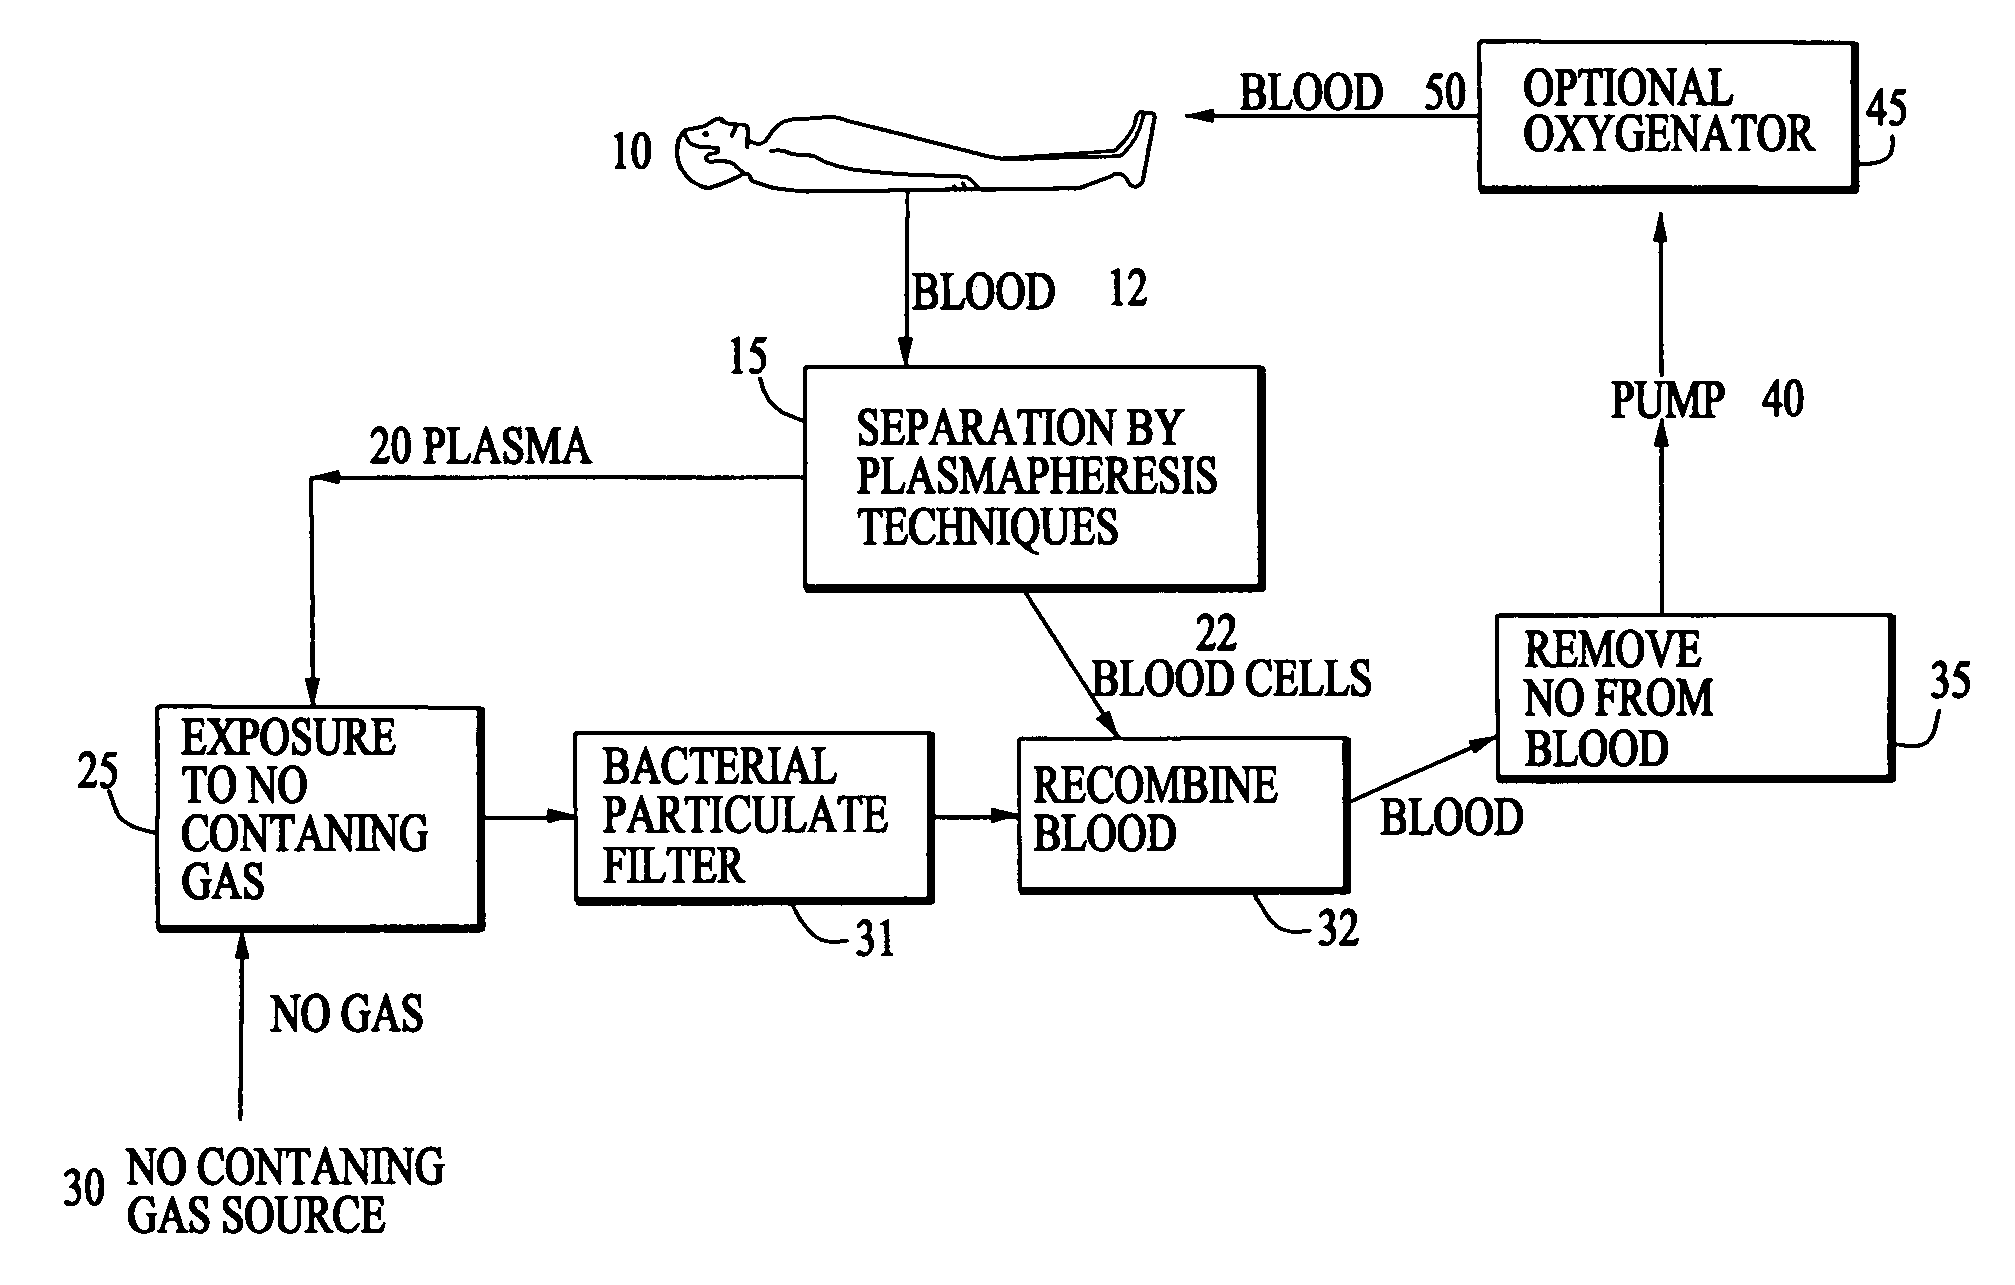 Use of nitric oxide gas in an extracorporeal circuitry to treat blood plasma